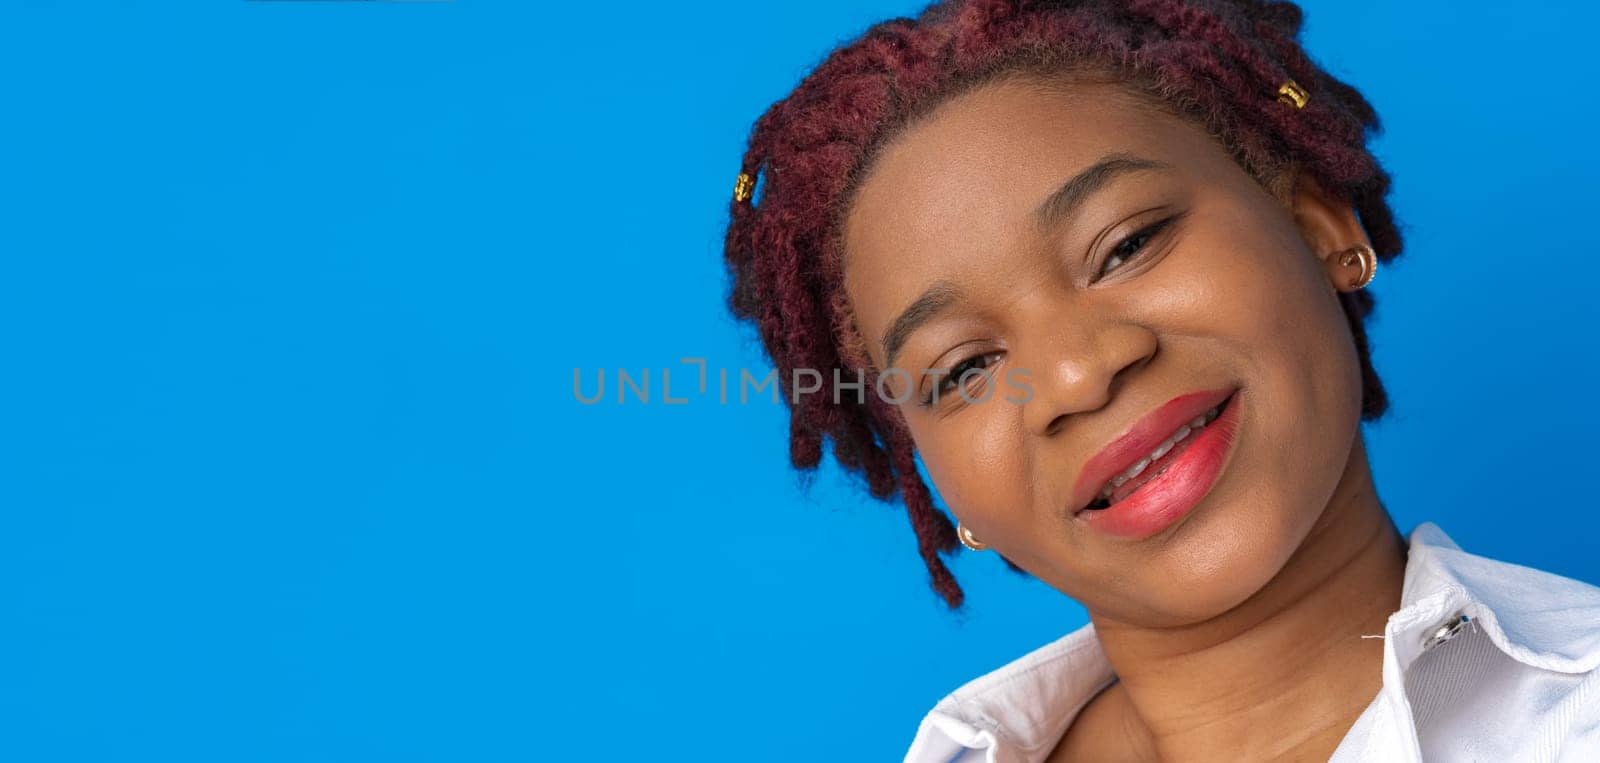 Portrait of nice attractive african american woman against blue background by Fabrikasimf